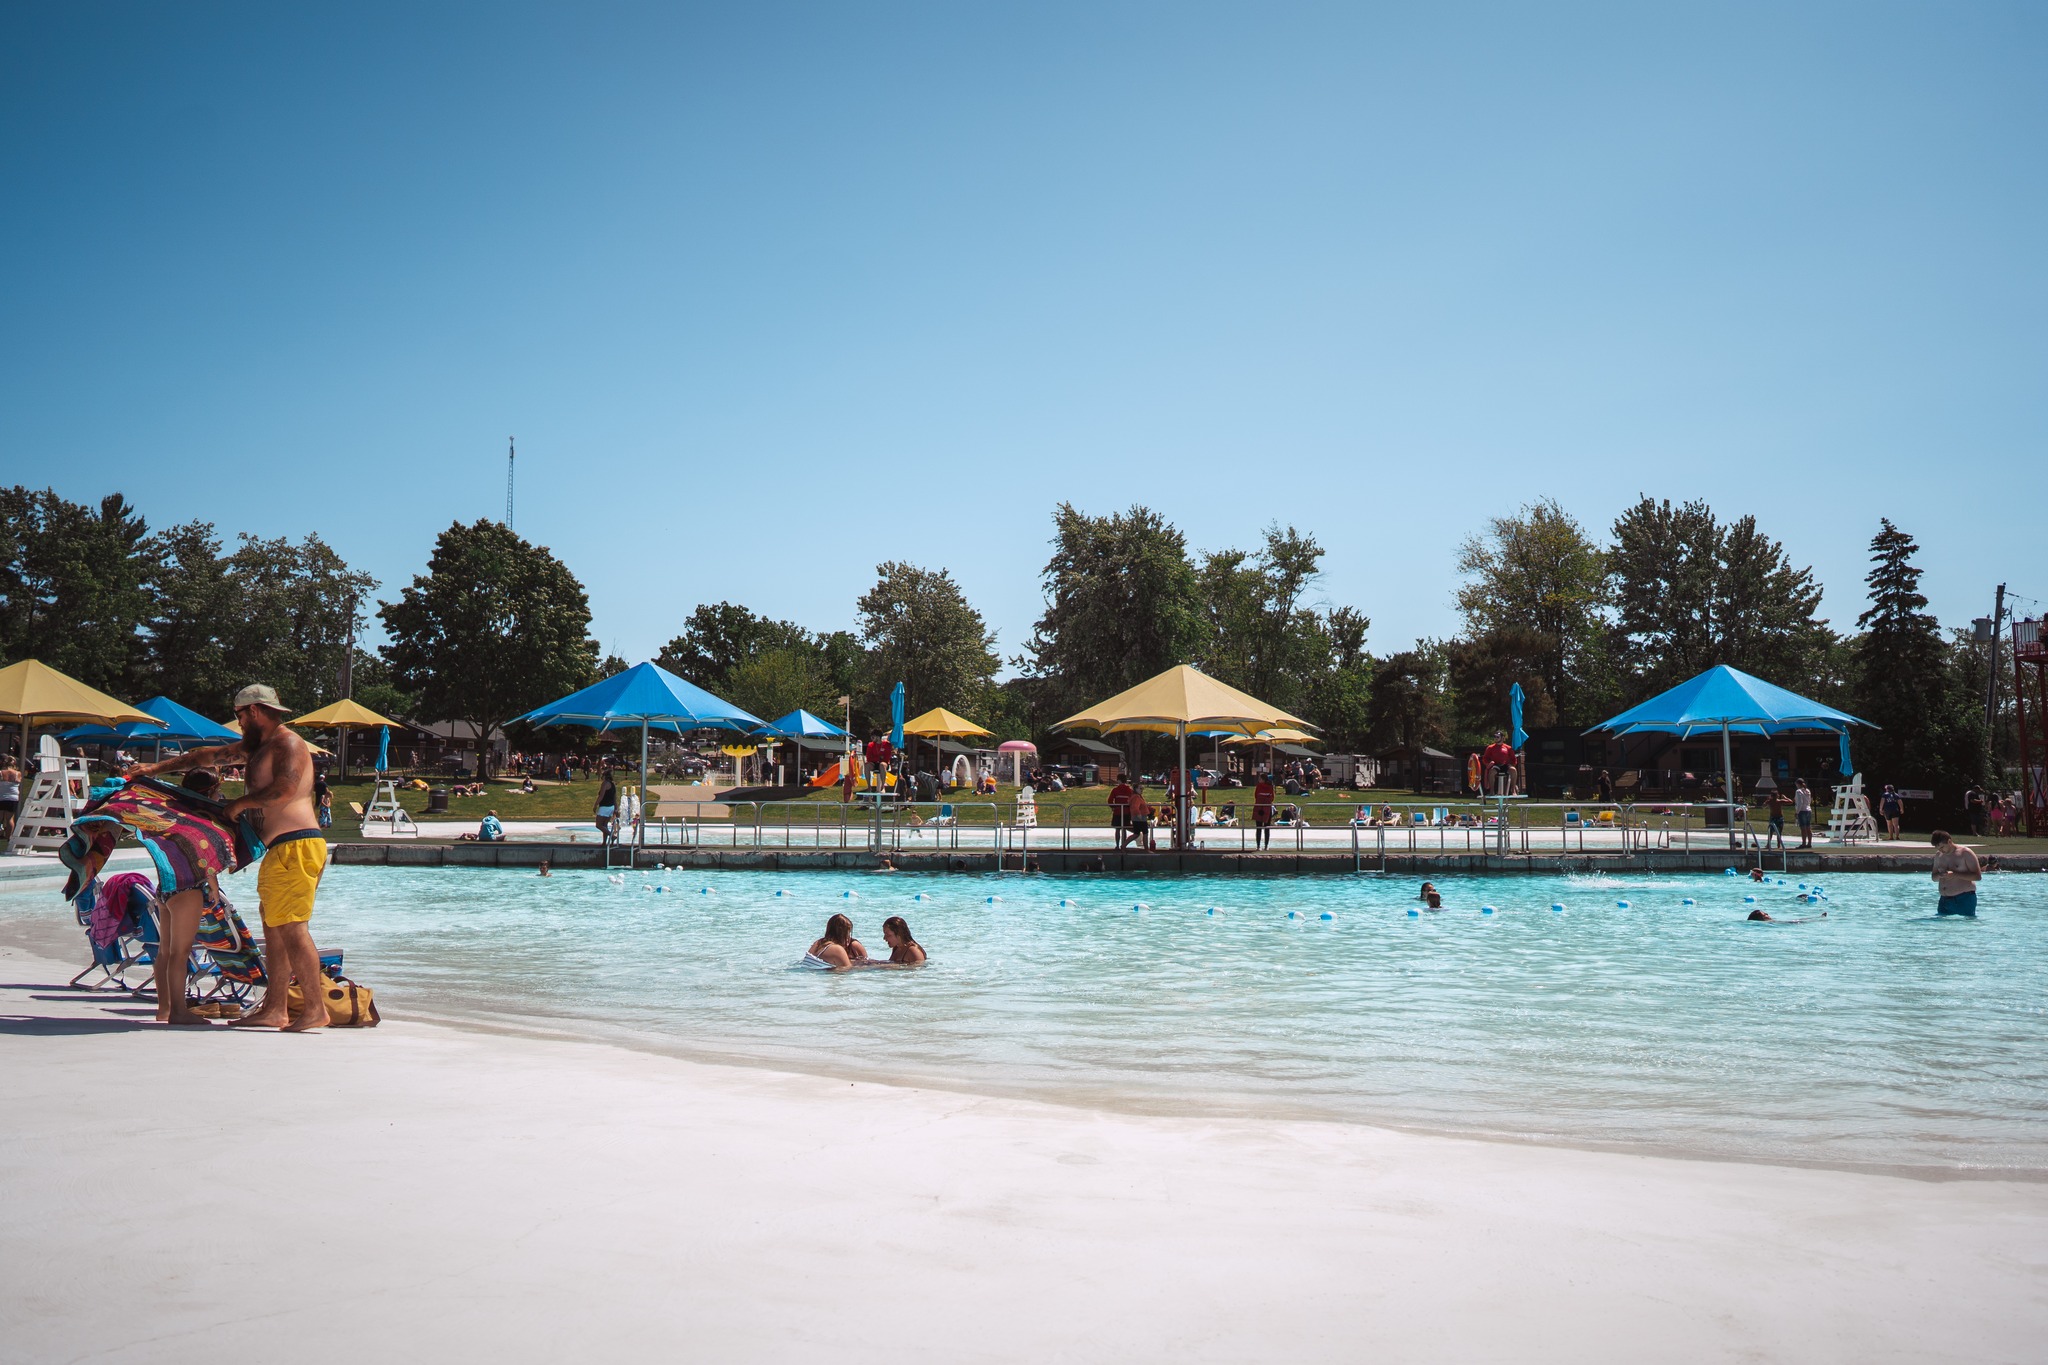 Bissell’s Hideaway is hiring Lifeguards and Supervisors for 2023 season!